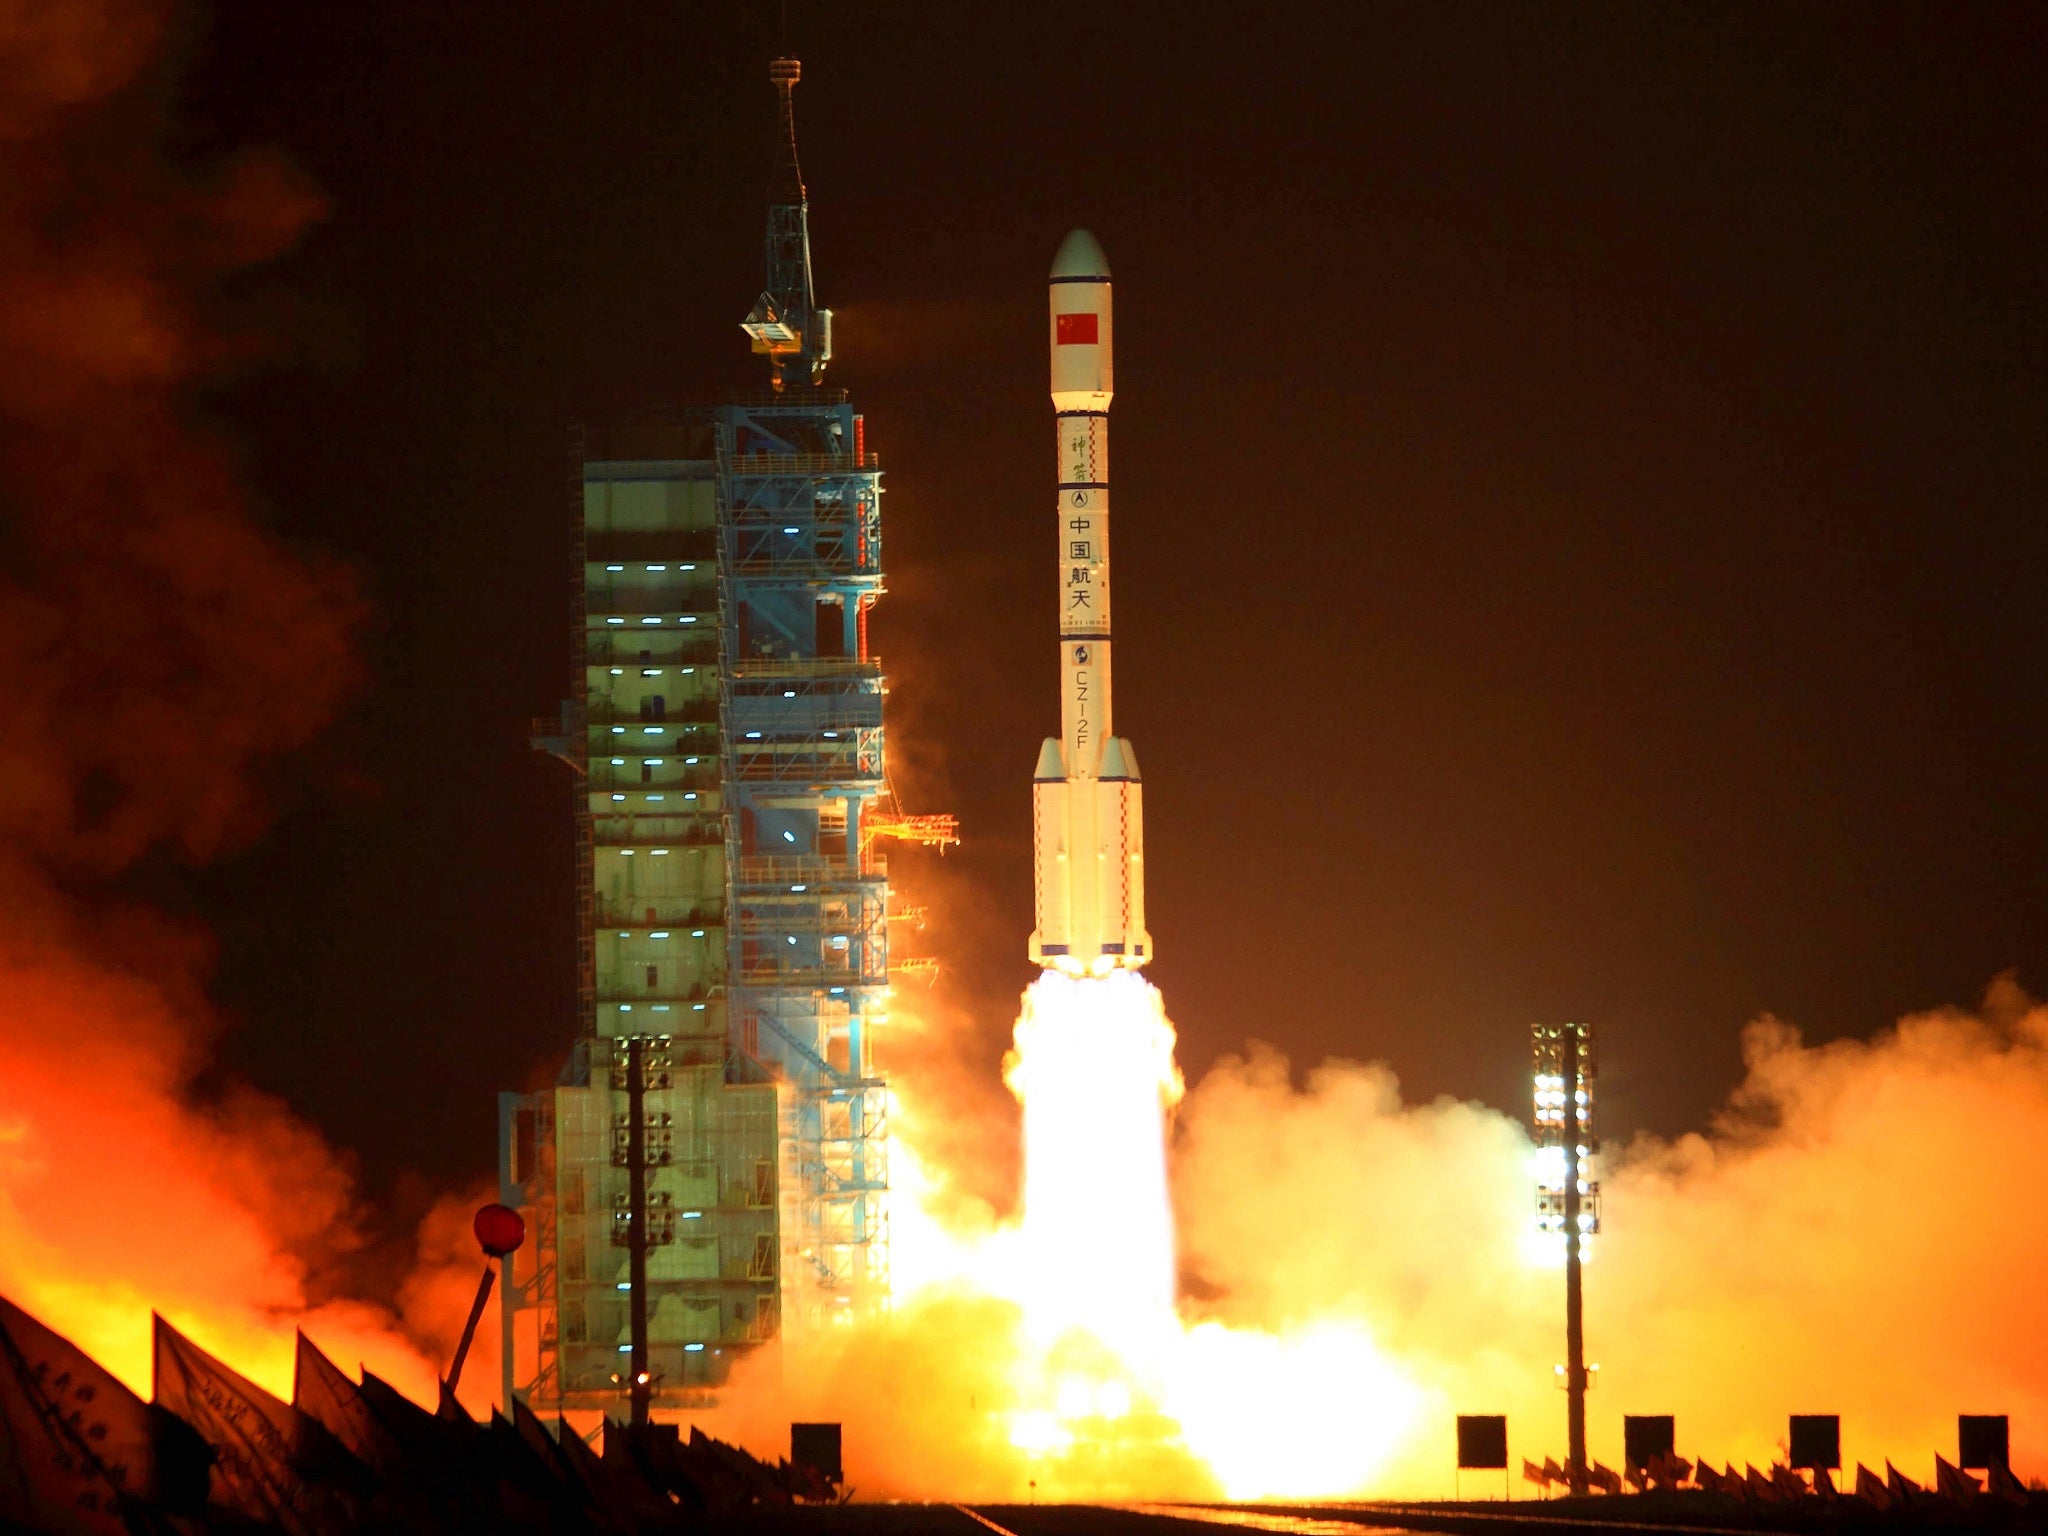 China's space station 'out of control' and on crash course to Earth | The Independent